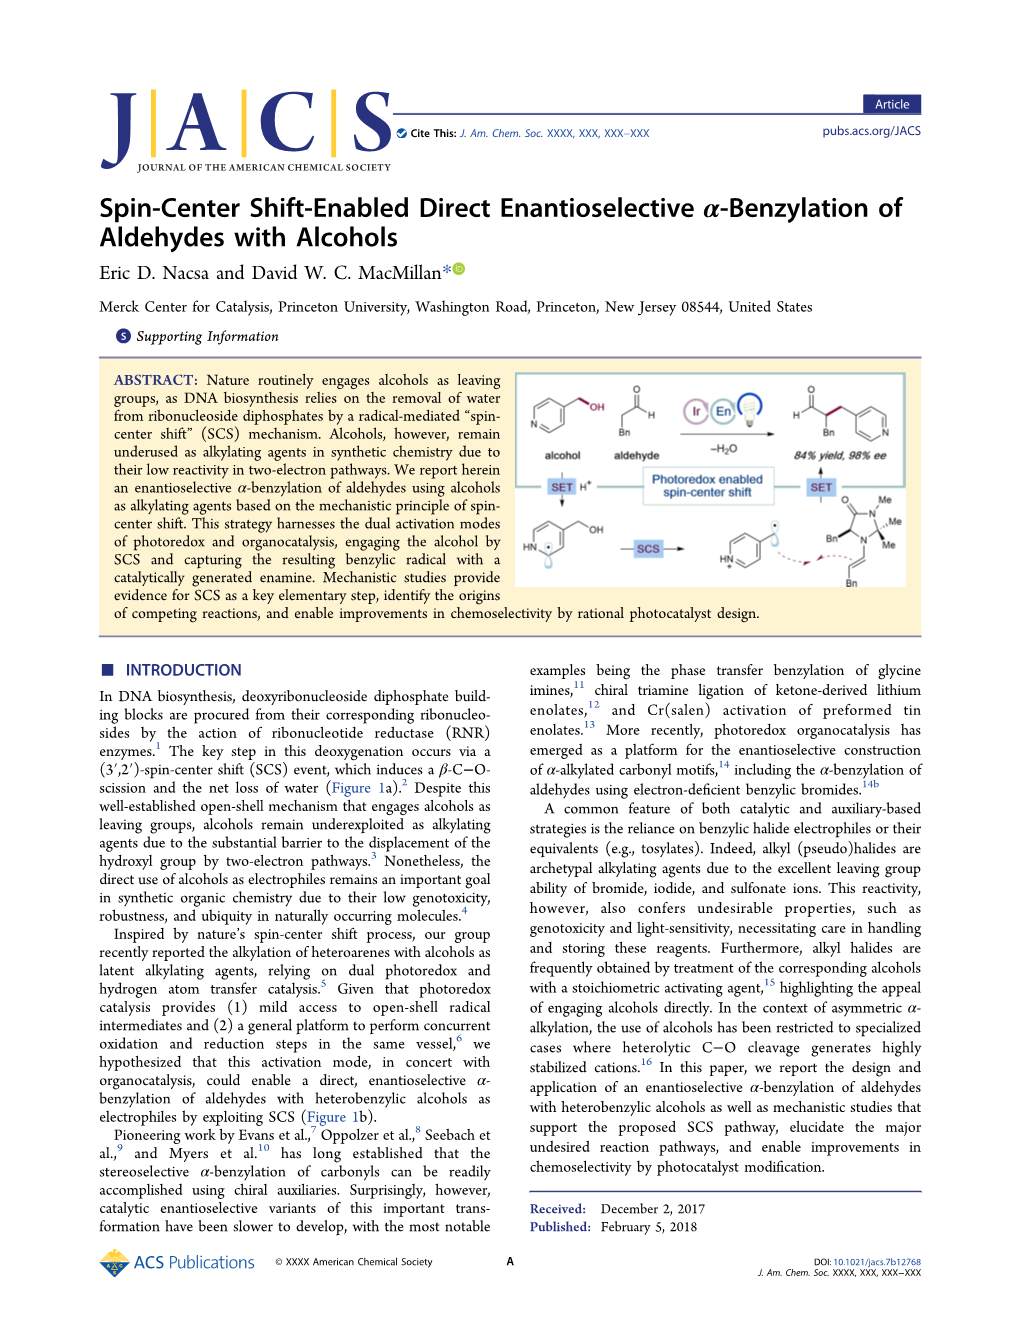 Spin-Center Shift-Enabled Direct Enantioselective Α-Benzylation Of